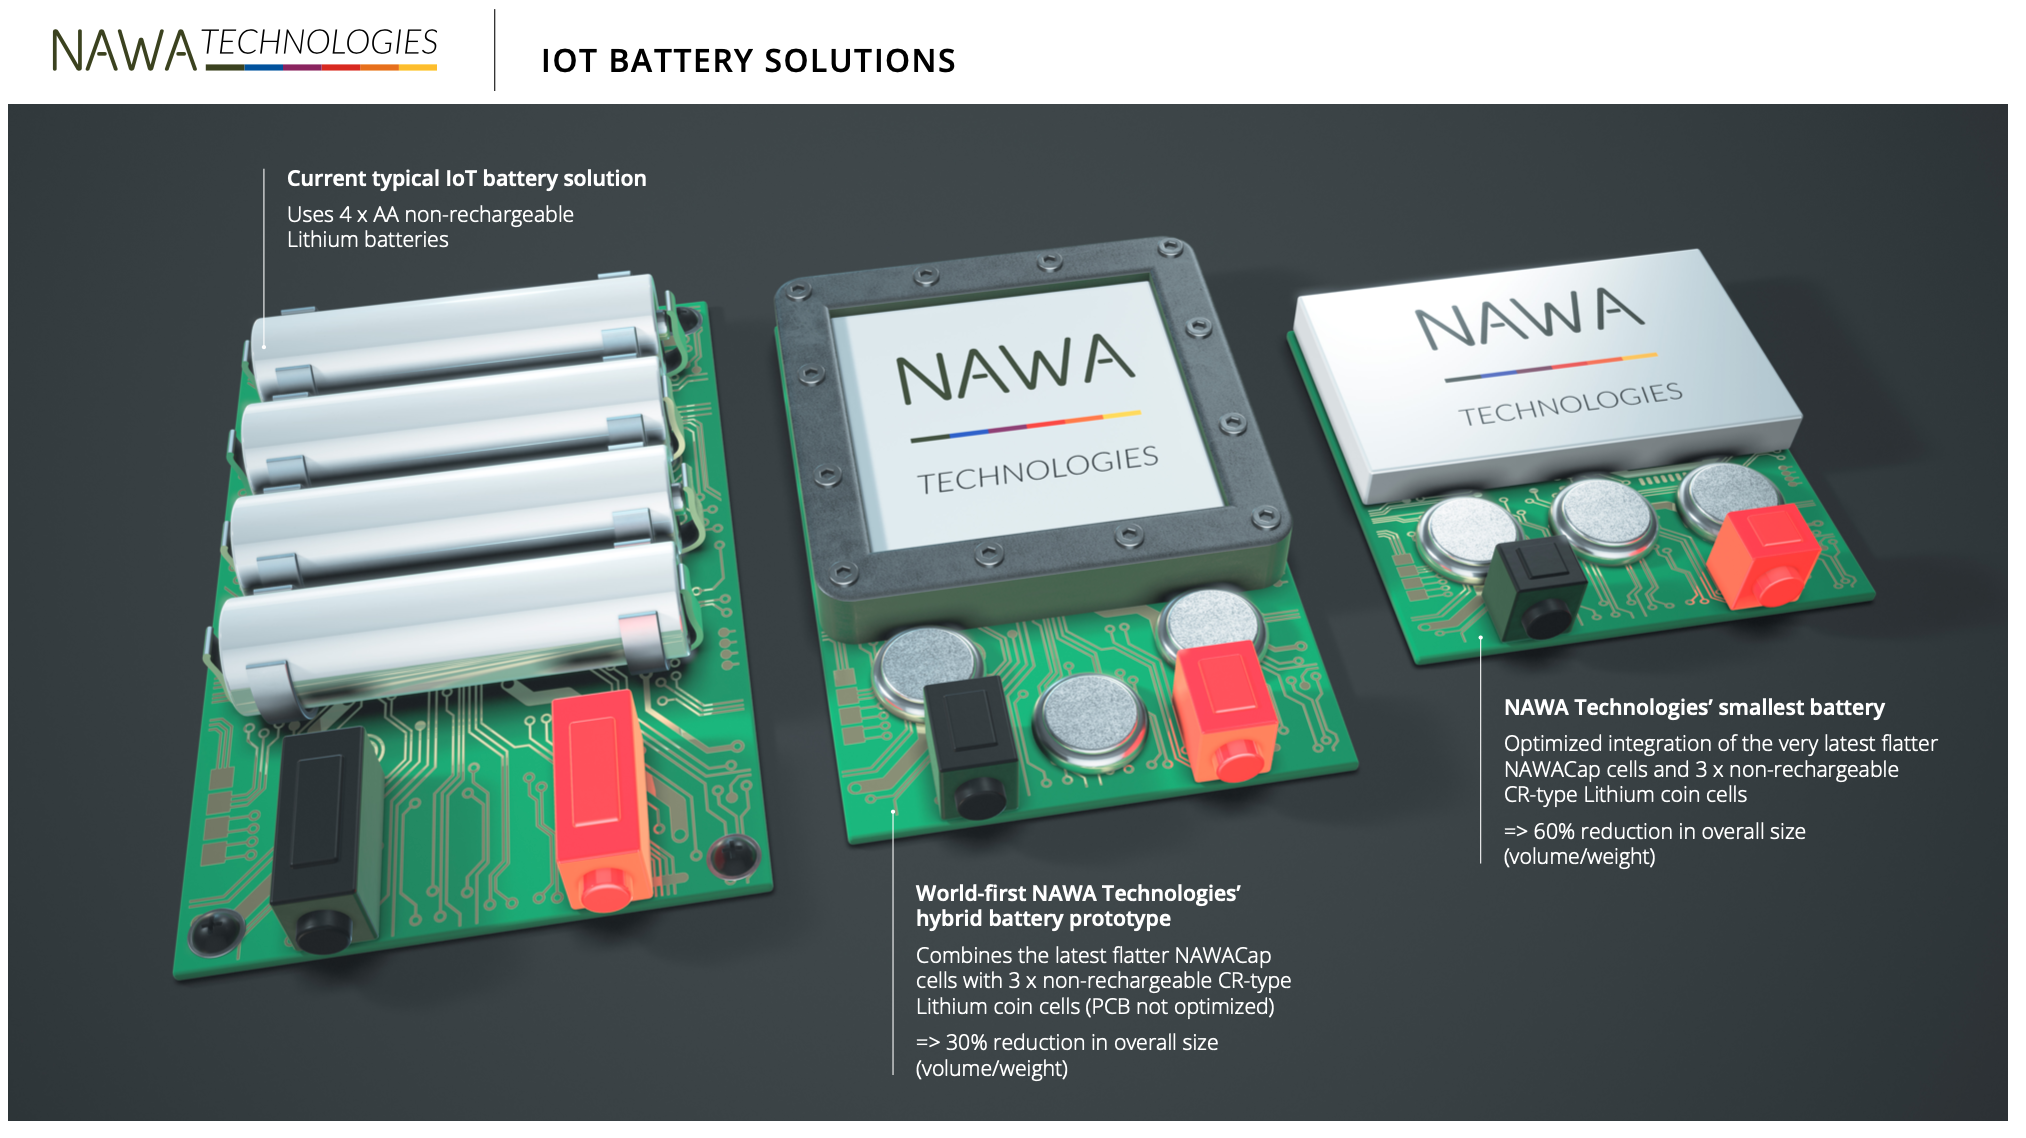 Image for NAWA Technologies’ Ultracapacitors Will Revolutionise The Cost, Efficiency And Capability Of IoT Devices